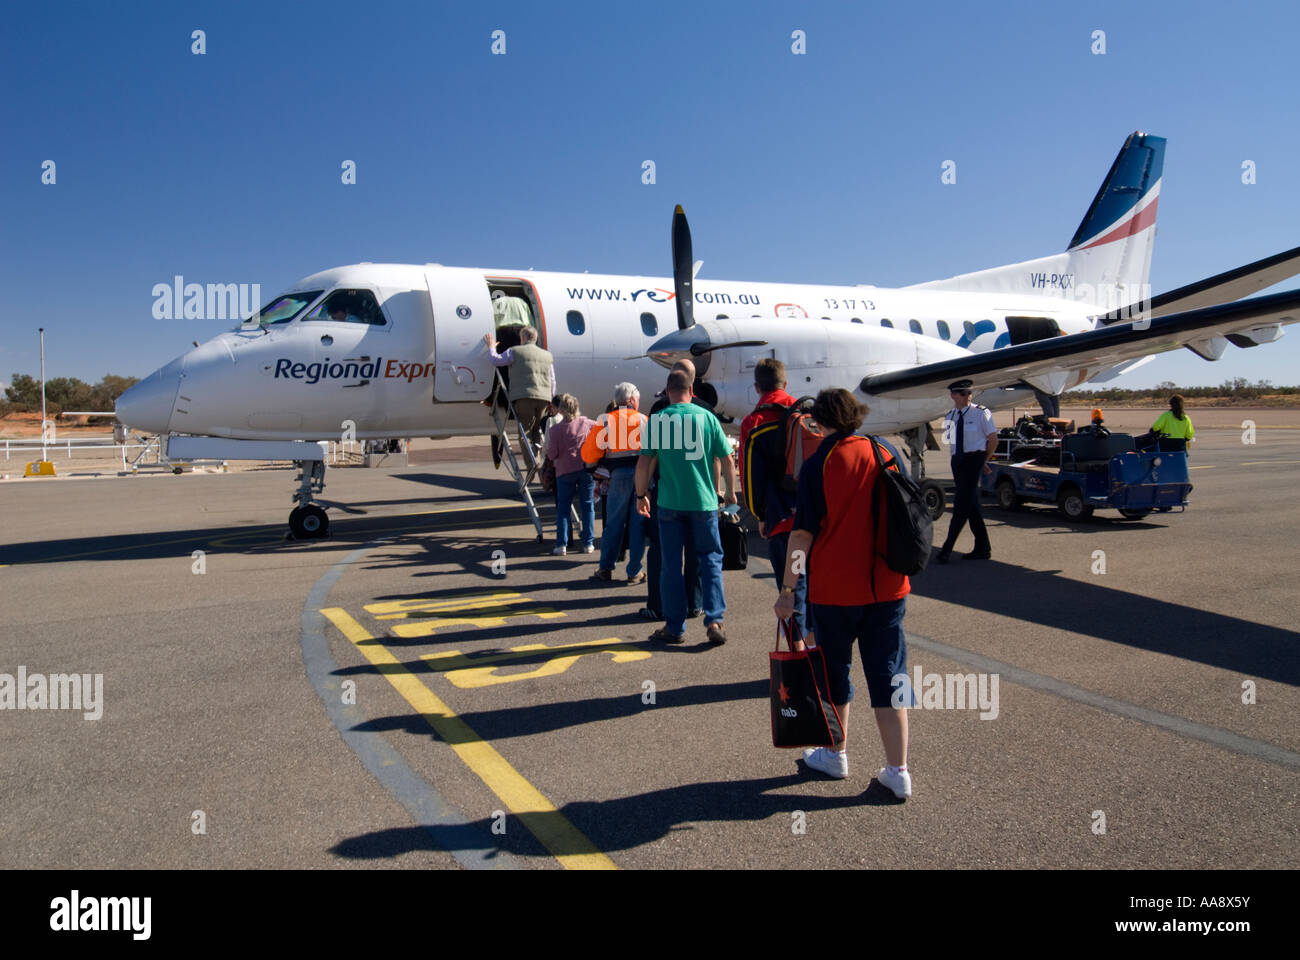 Rex Regional airline loading passengers at Roxby Downs airport Australia 2007 Stock Photo